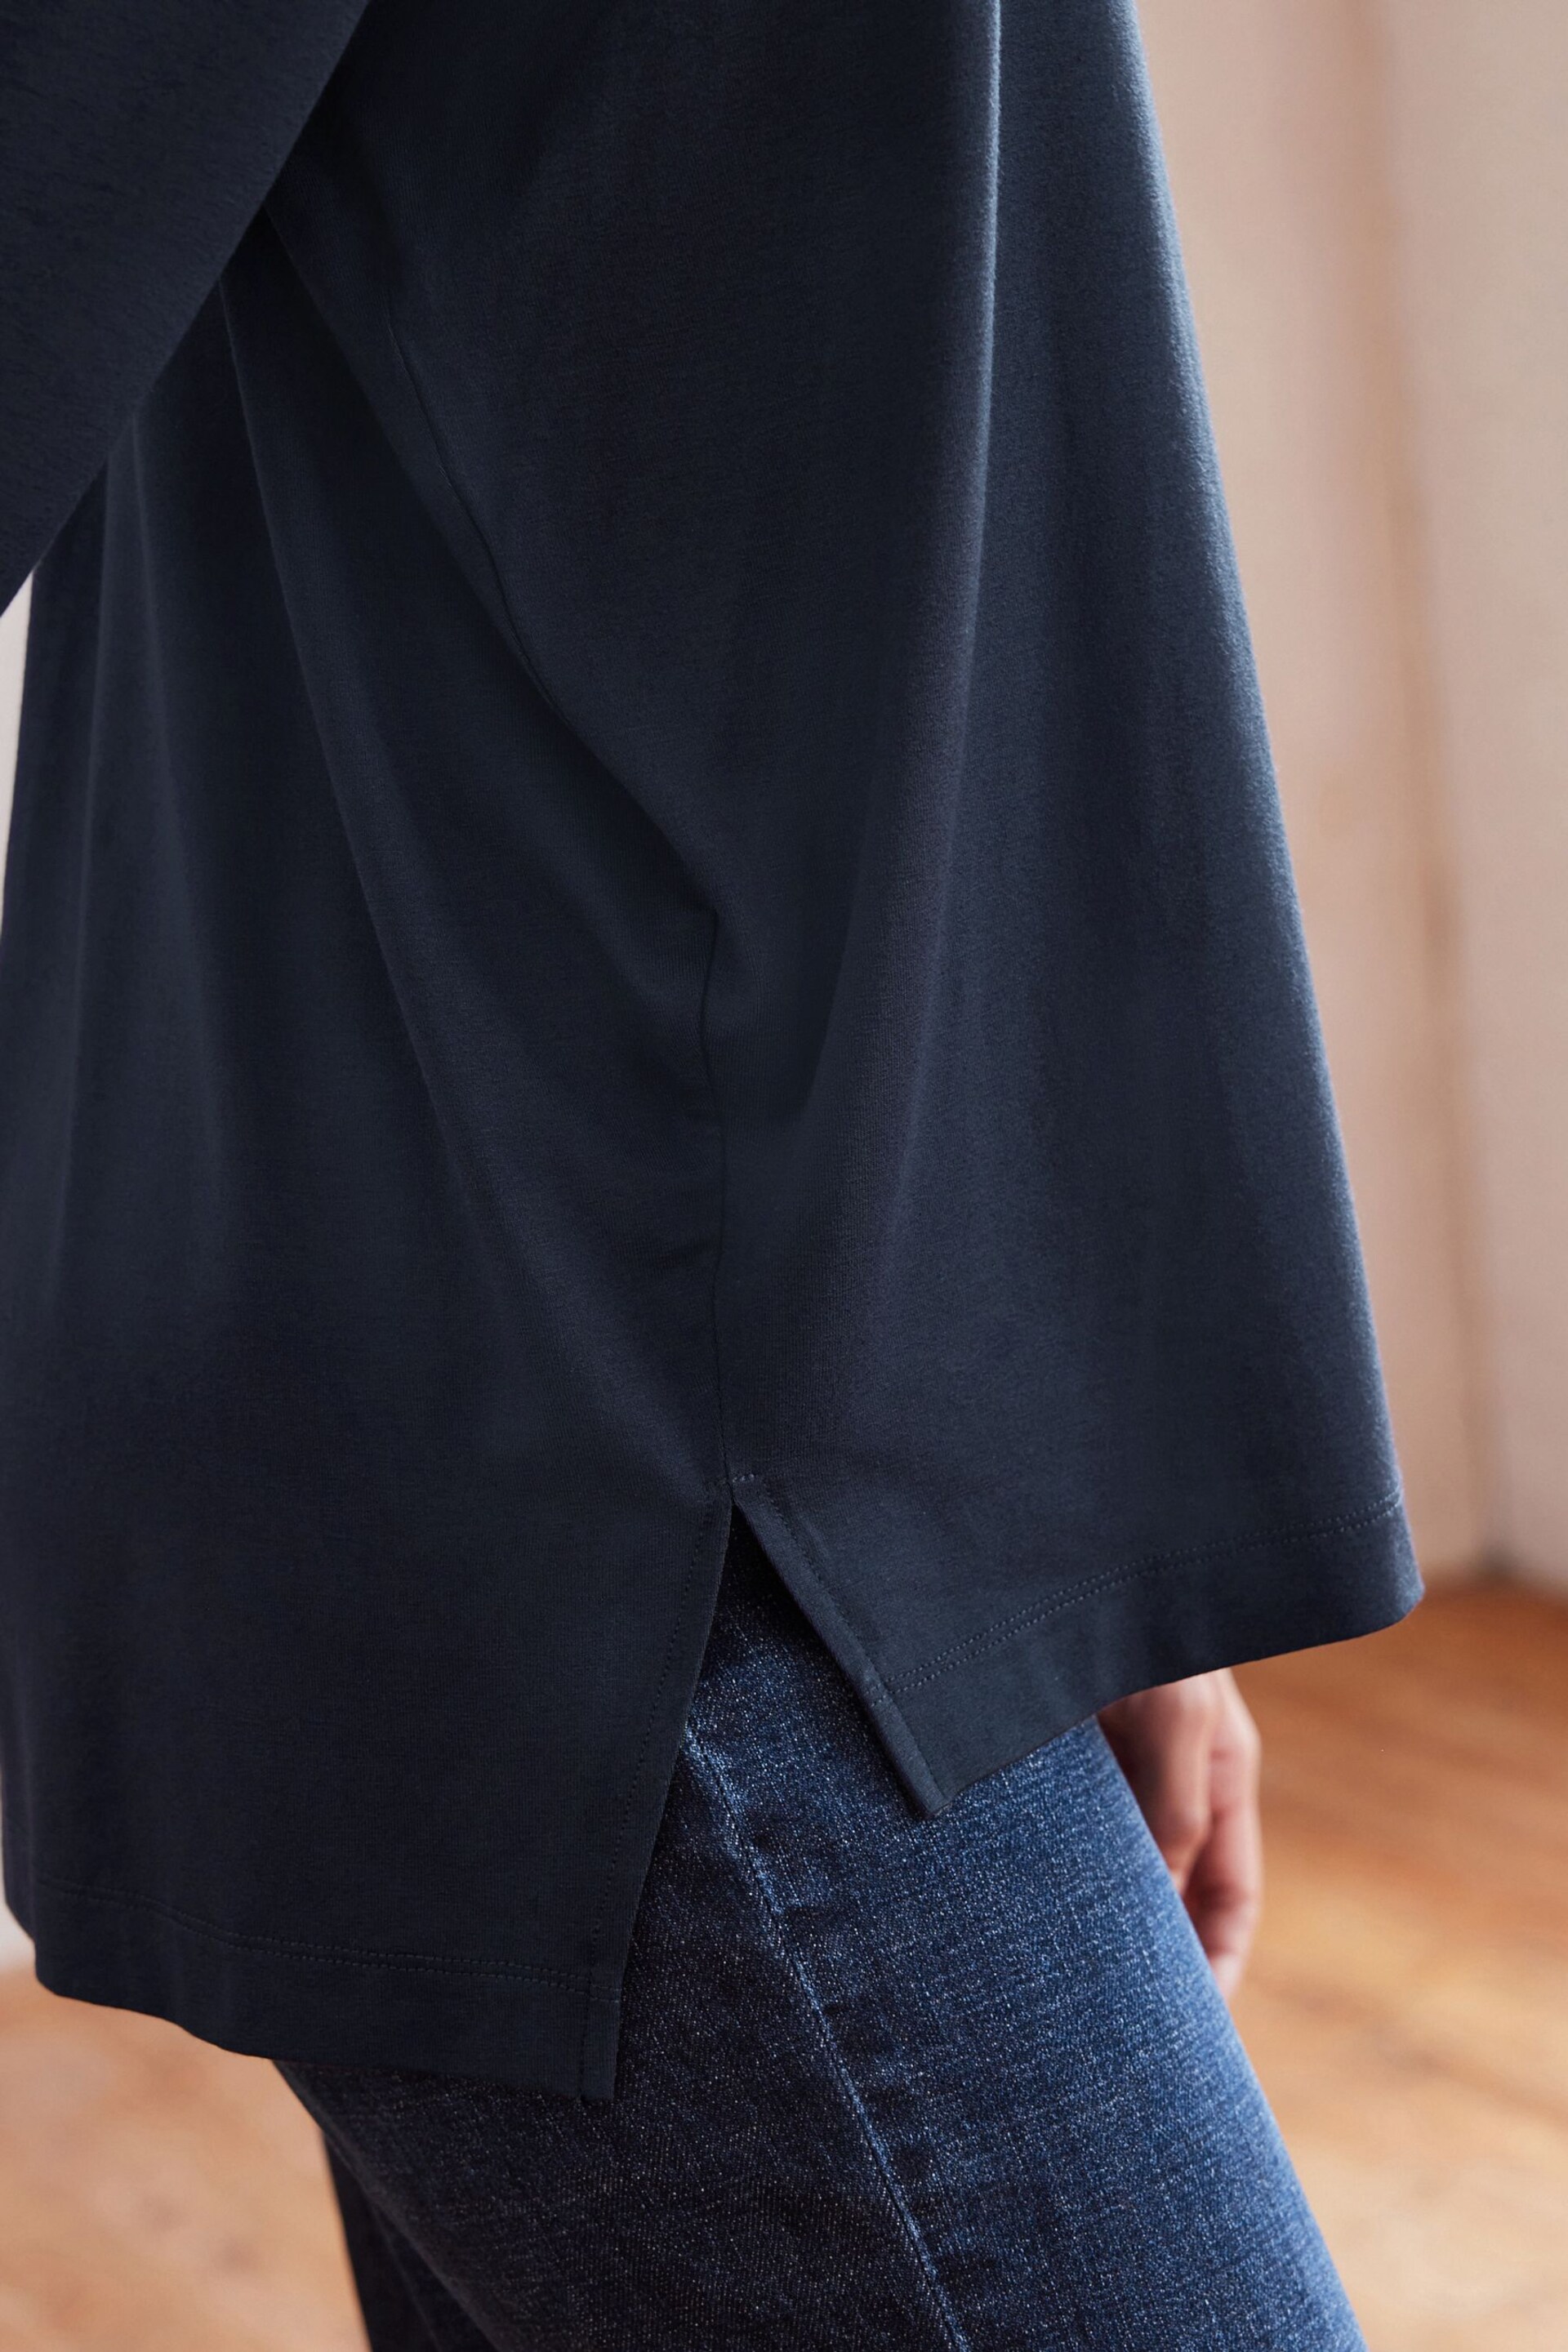 Navy Blue Long Sleeve Tunic Top - Image 5 of 7